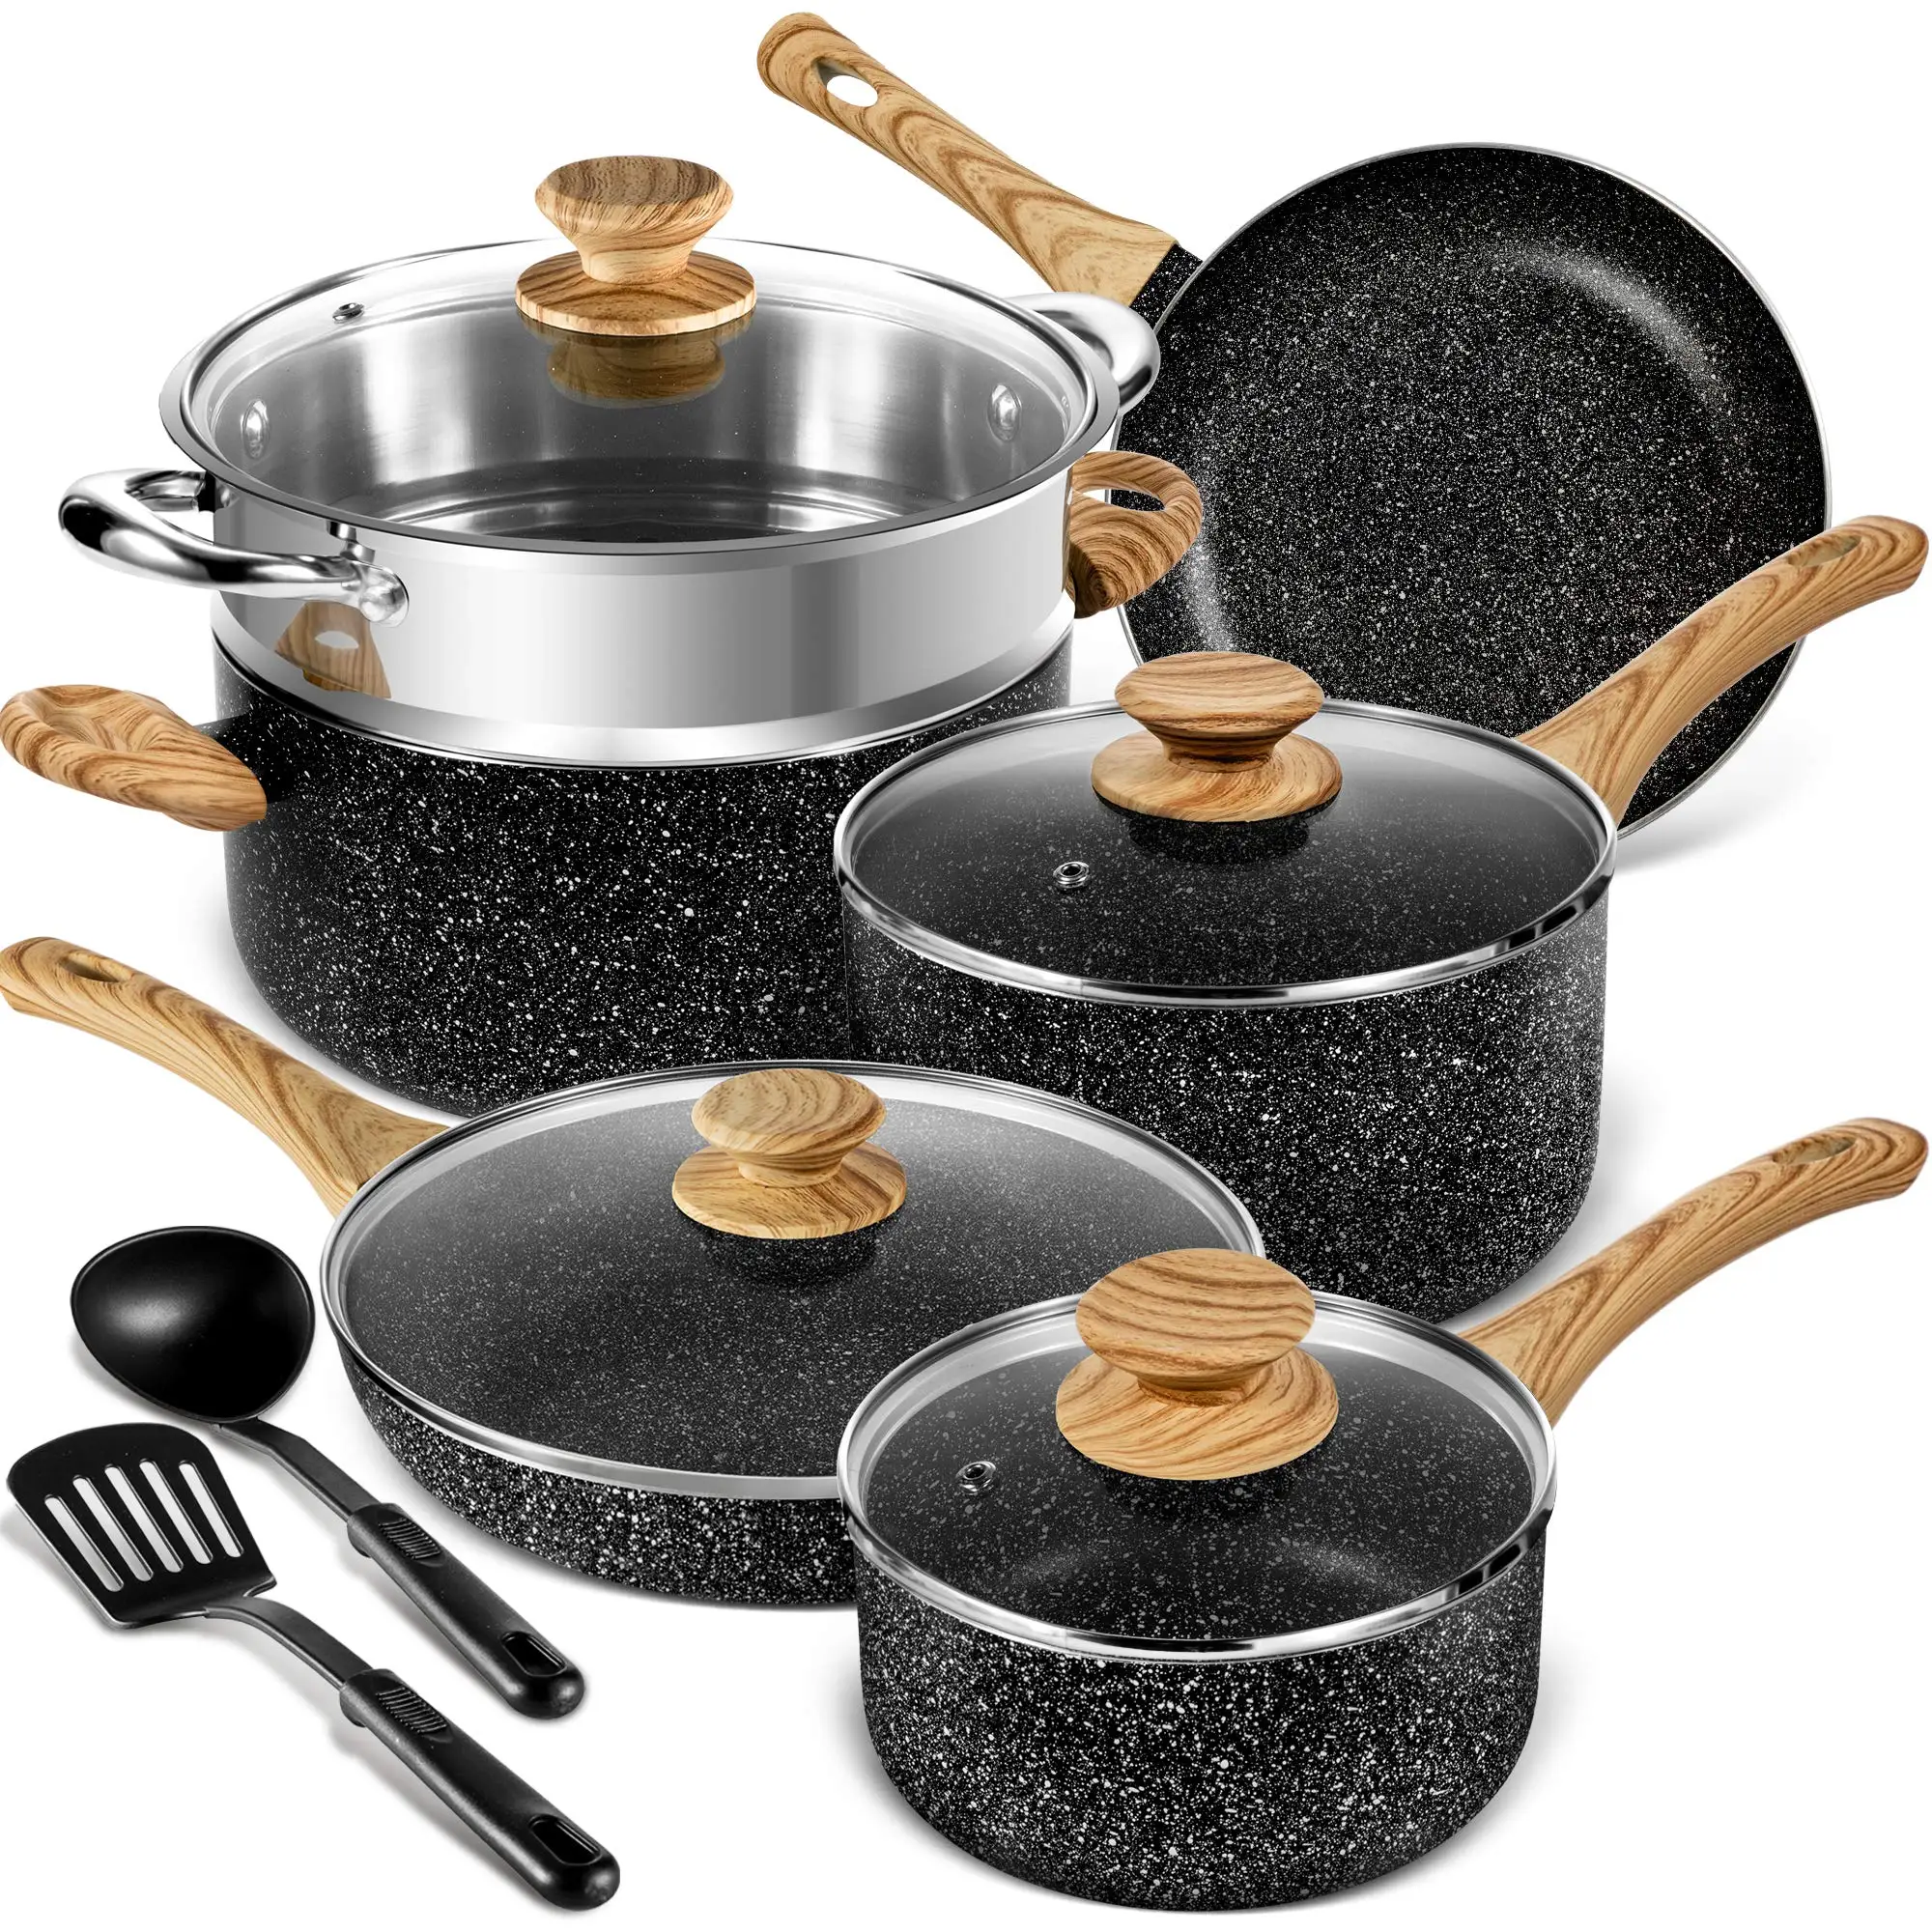 https://ae01.alicdn.com/kf/S0800074709ac4a3ba85967c3b6a846daW/MICHELANGELO-Pots-and-Pans-Set-Stone-Cookware-Set-12-Piece-Kitchen-Cookware-Sets-with-Spatula-Spoon.jpg